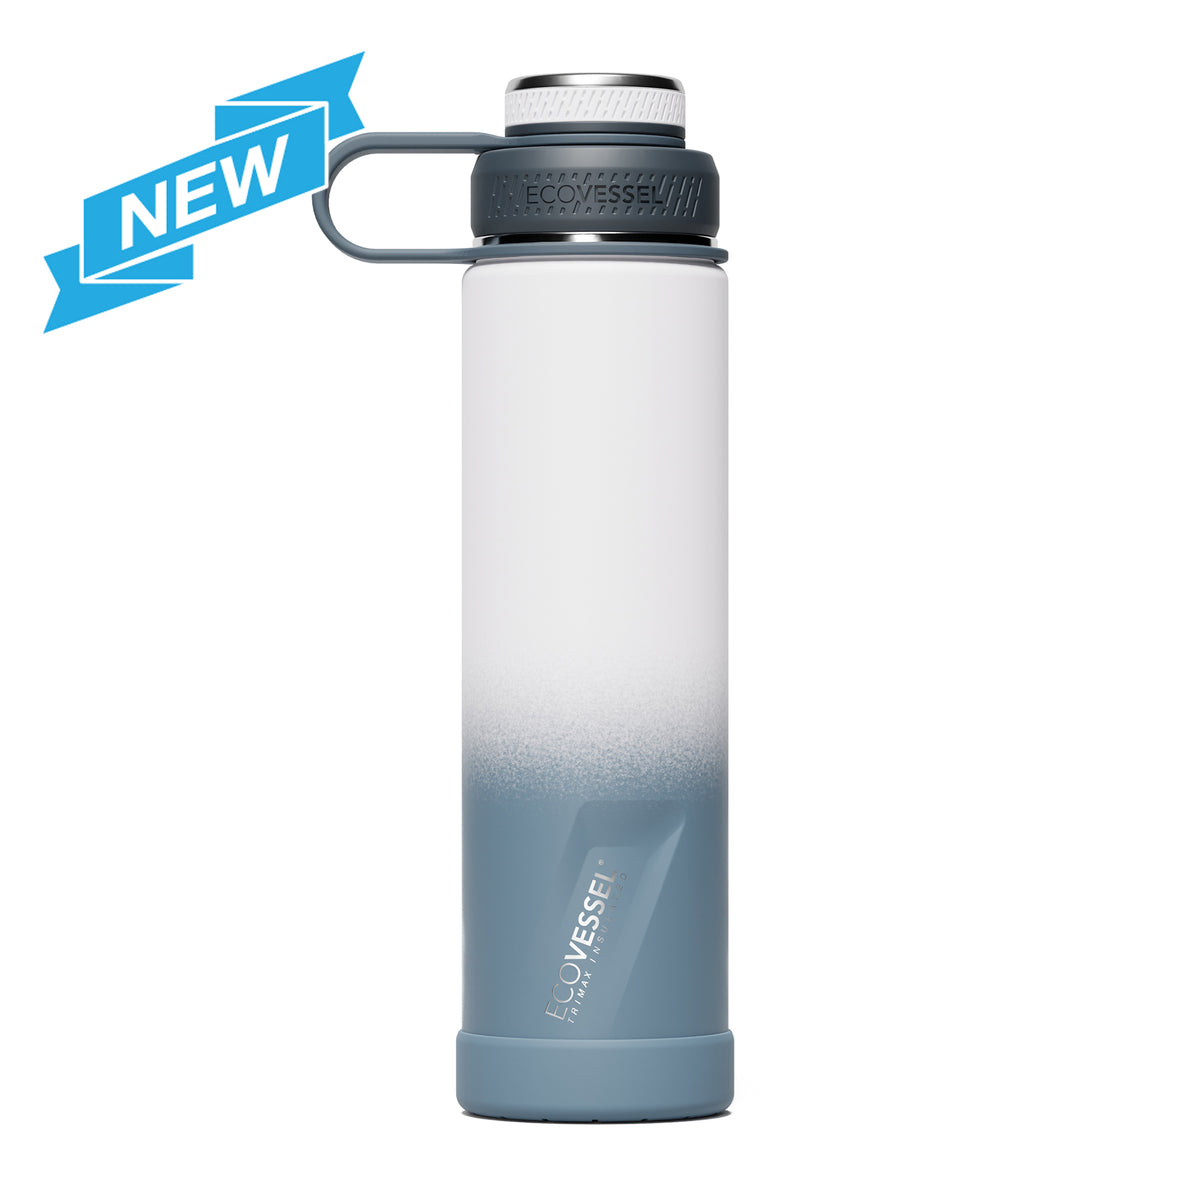 Thermoflask Stainless Steel Insulated Water Bottles 24 oz/710 ml, 4